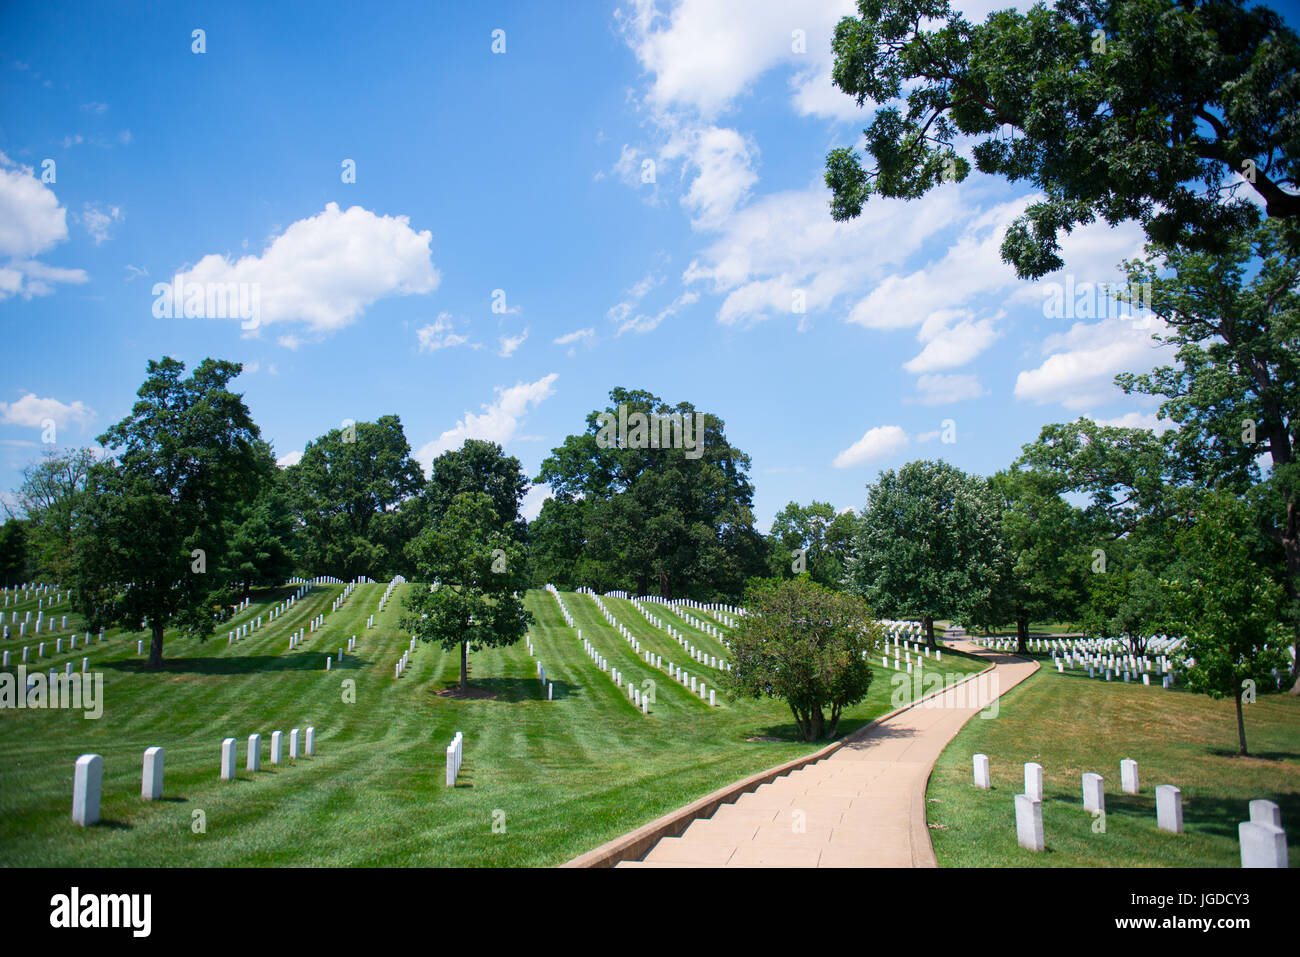 The first day of summer in Section 36 of Arlington National Cemetery, Arlington, Va., June 21, 2017.  The cemetery’s 651 acres is the final resting place for more than 400,000 active duty service members, veterans and their families. (U.S. Army photo by Elizabeth Fraser/Arlington National Cemetery/released) Stock Photo